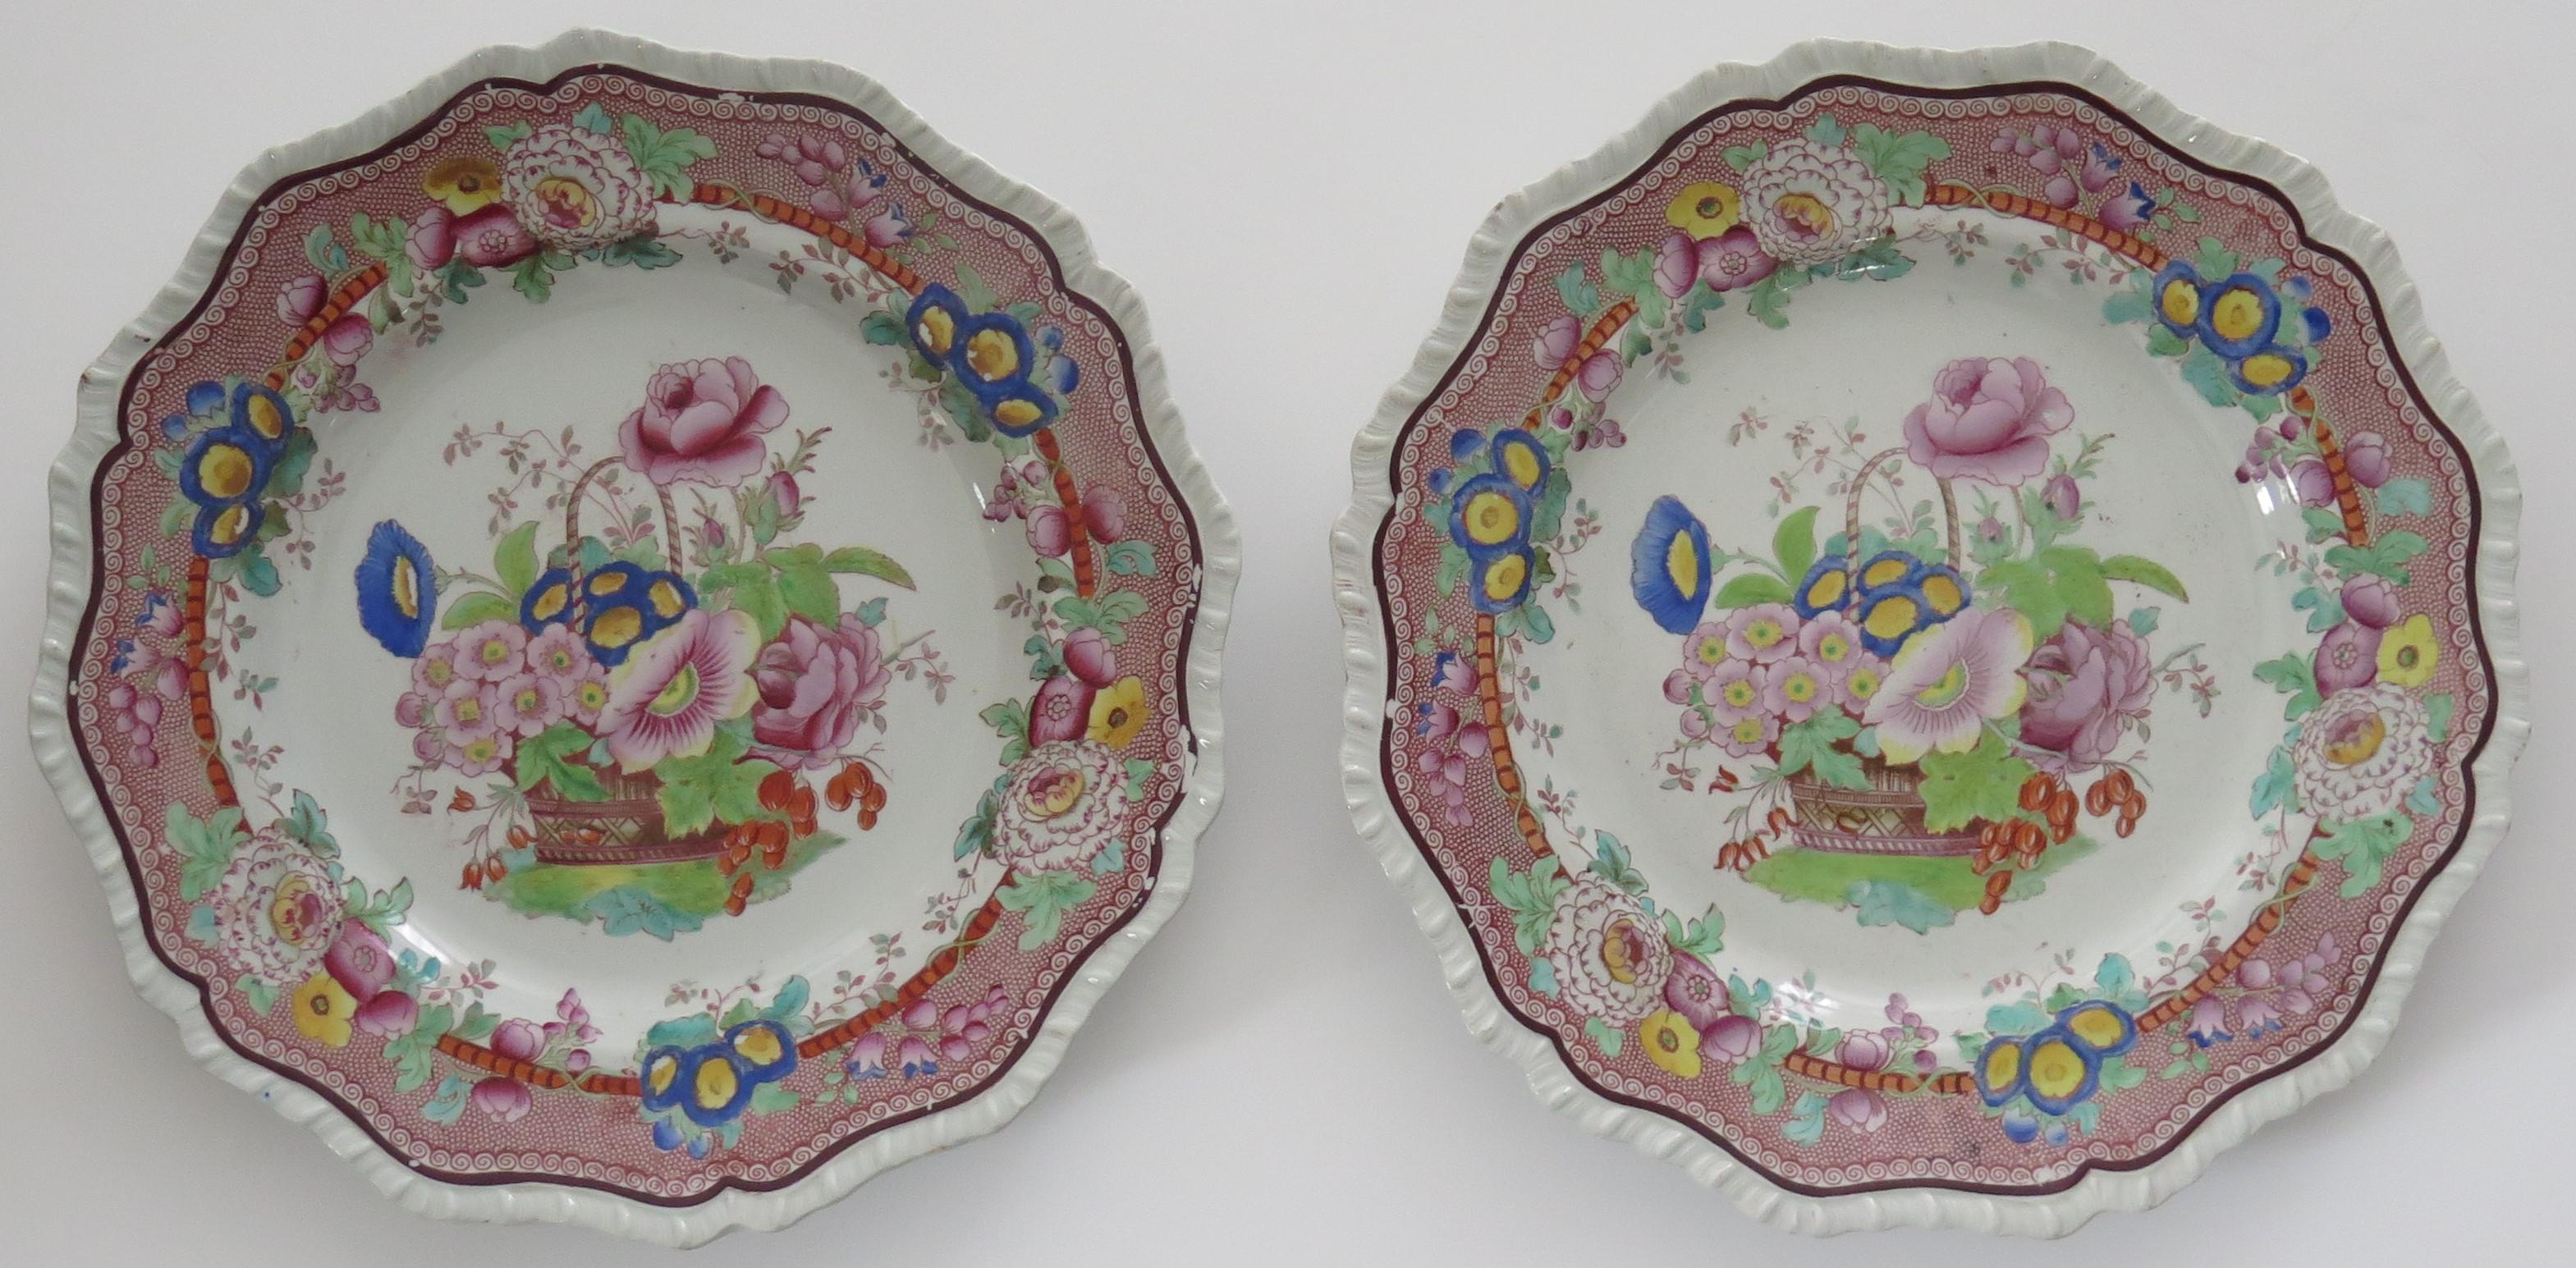 This is a good PAIR of ironstone Dinner Plates in hand painted floral pattern No. 23, made by Hicks and Meigh of Shelton, Staffordshire, England between 1812 and 1822, circa 1815.

The plates have a large diameter of over 10 inches and are well